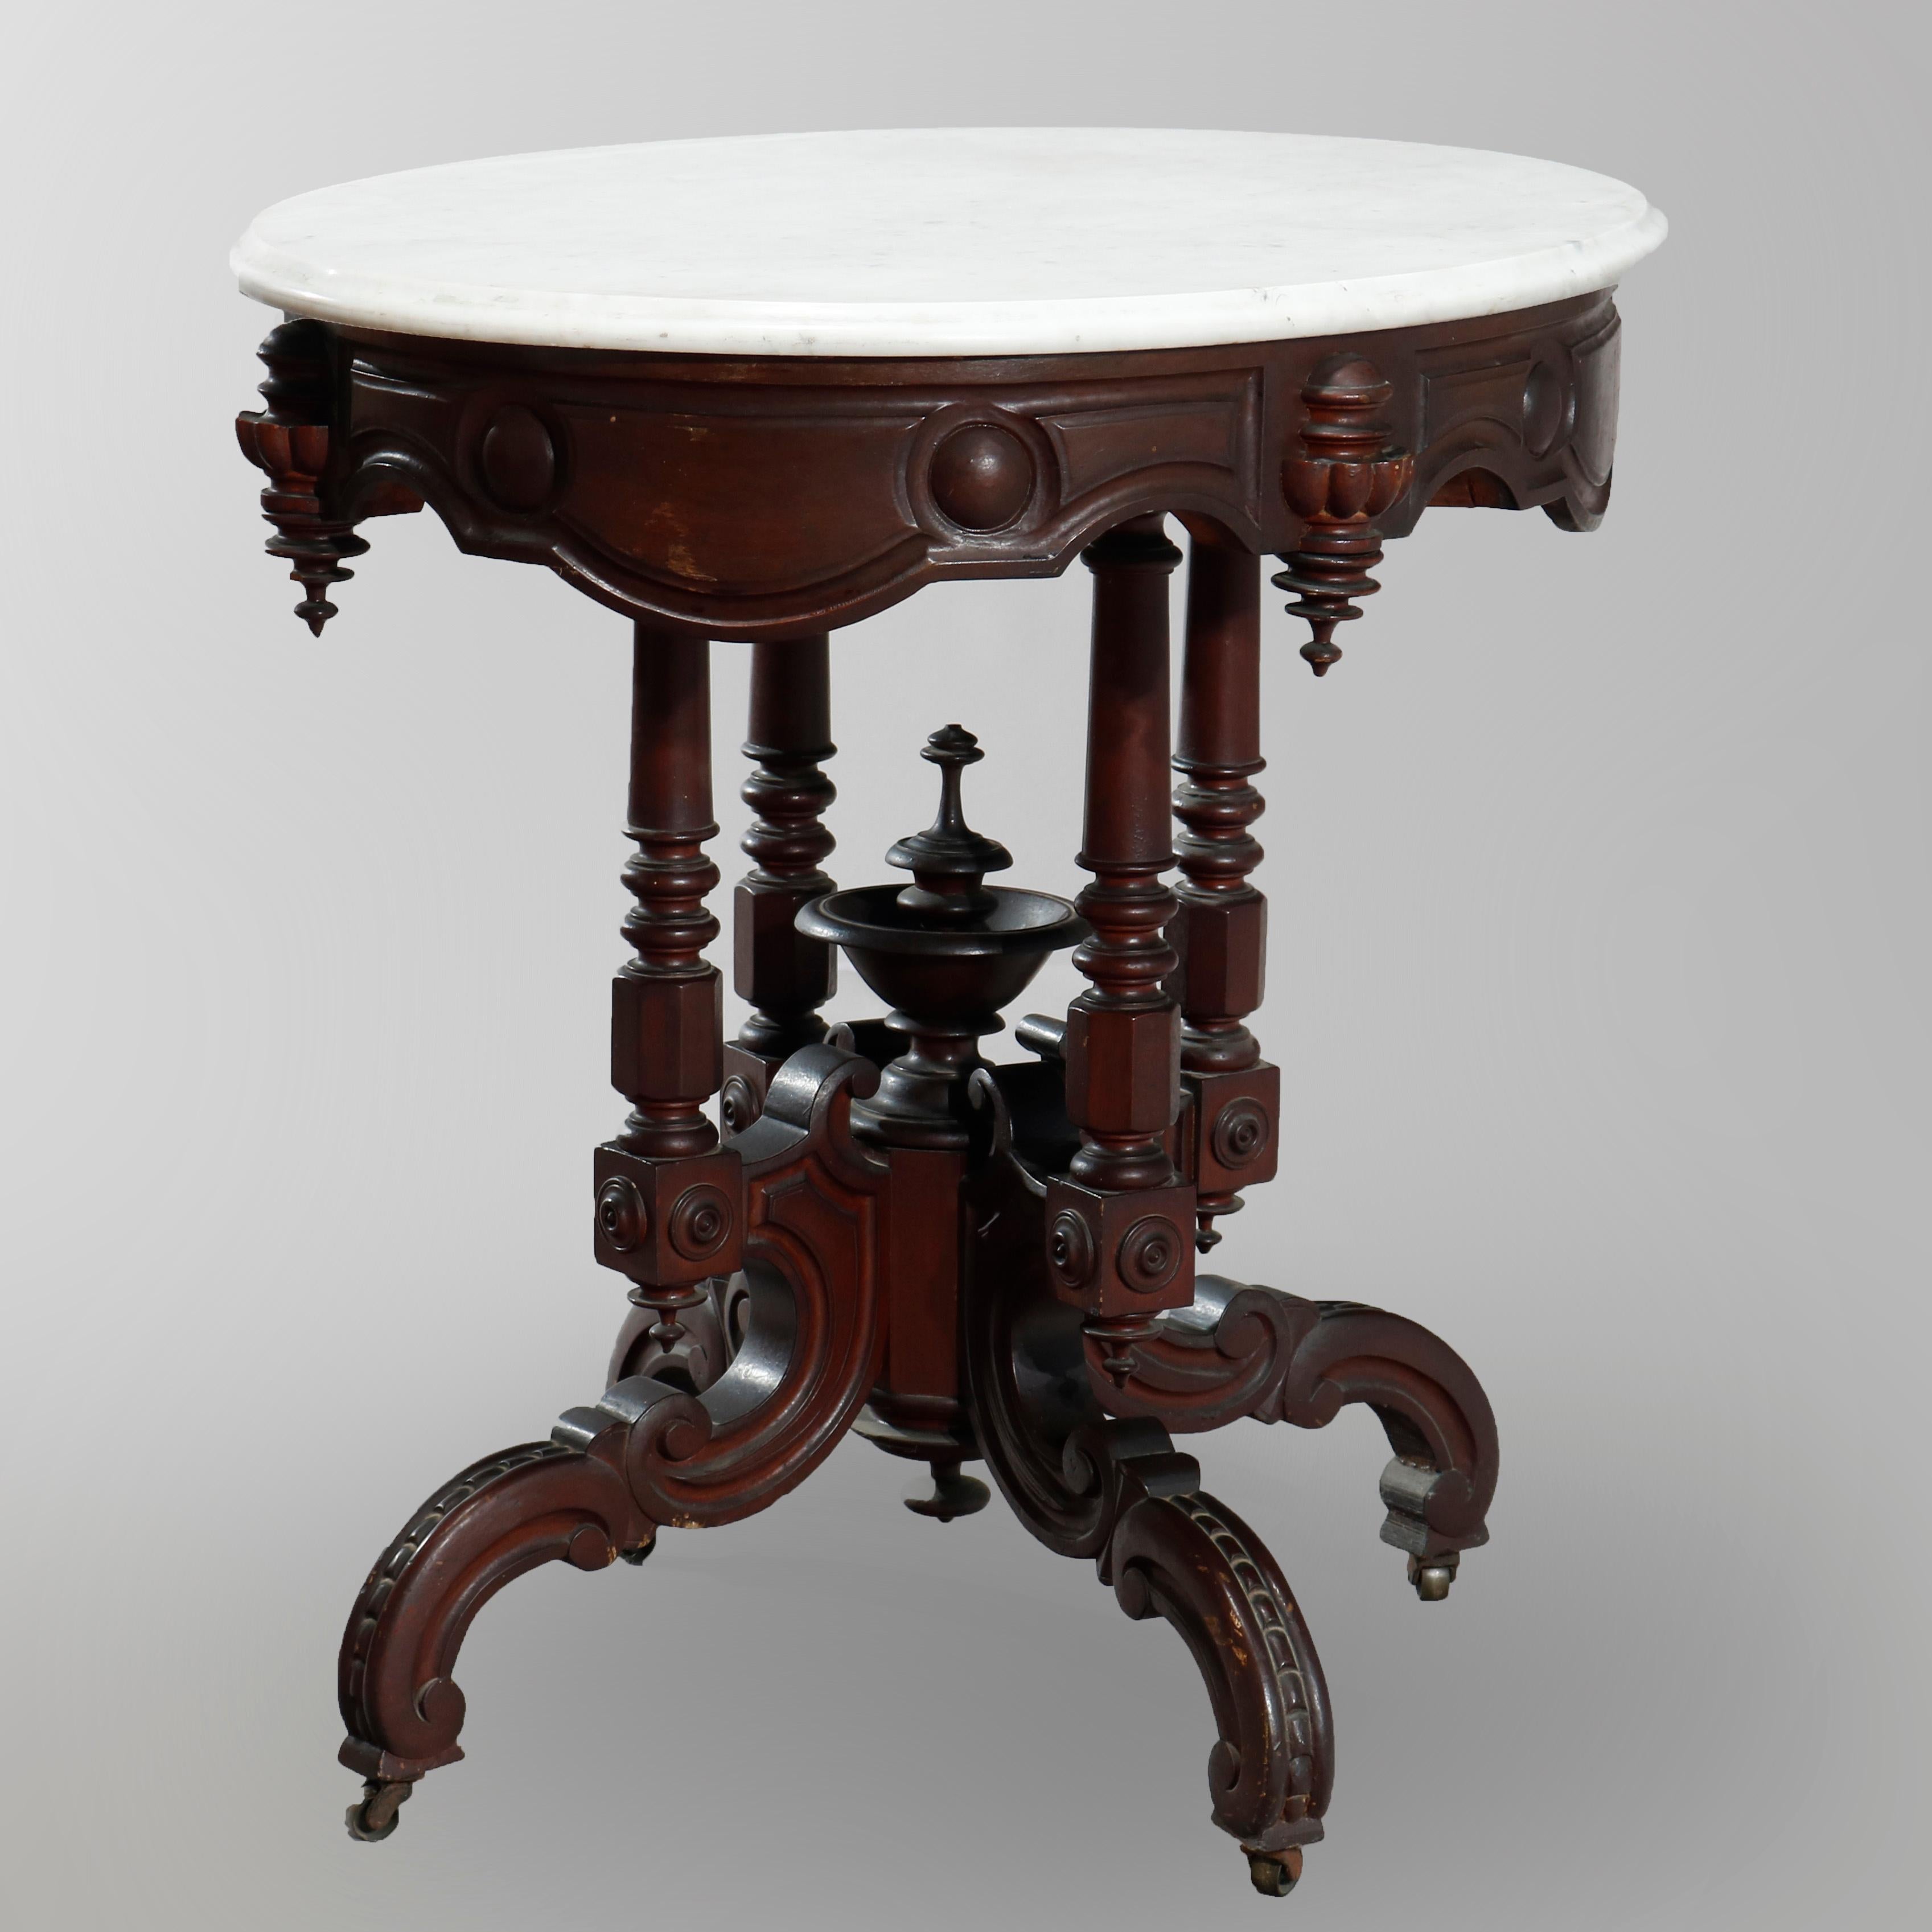 American Antique Victorian Oval Carved Walnut Marble-Top Parlor Table, circa 1890